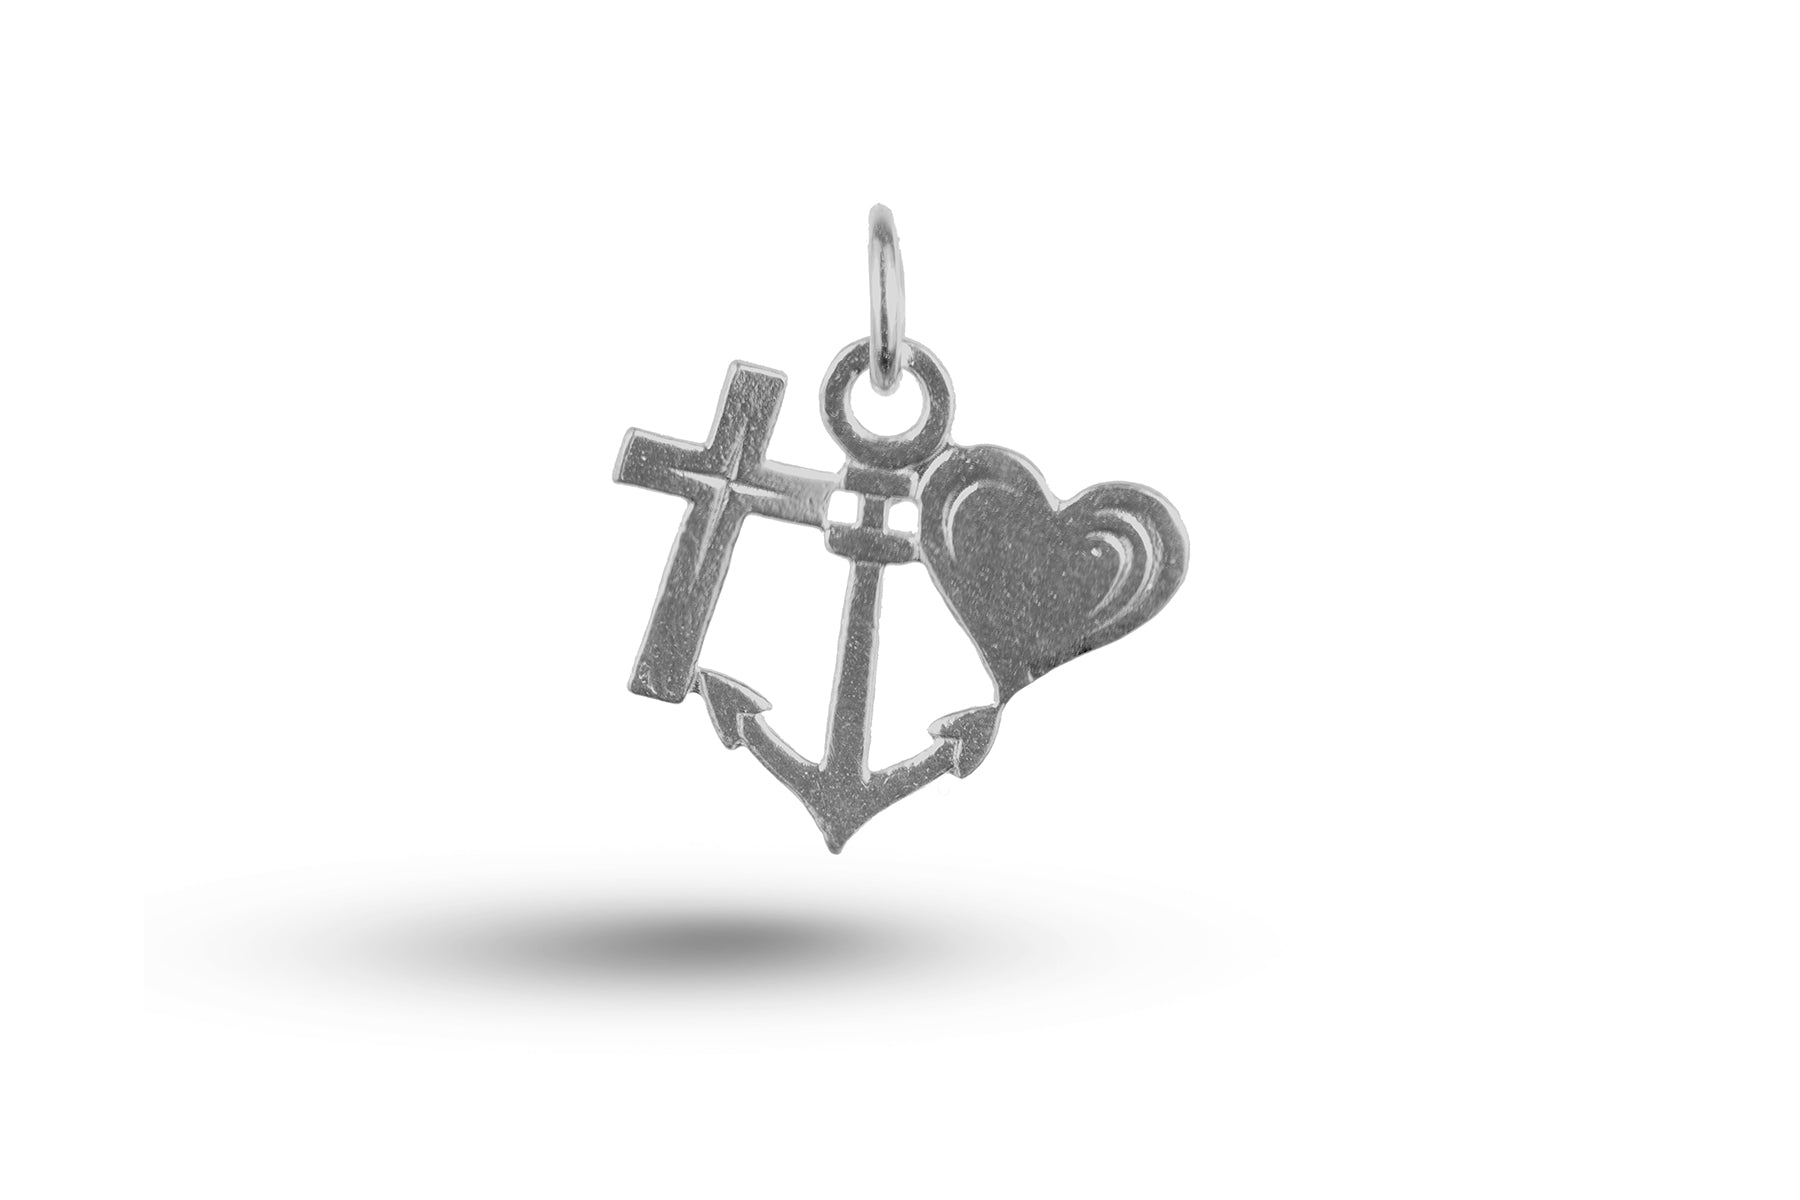 White gold Faith Hope and Charity charm.